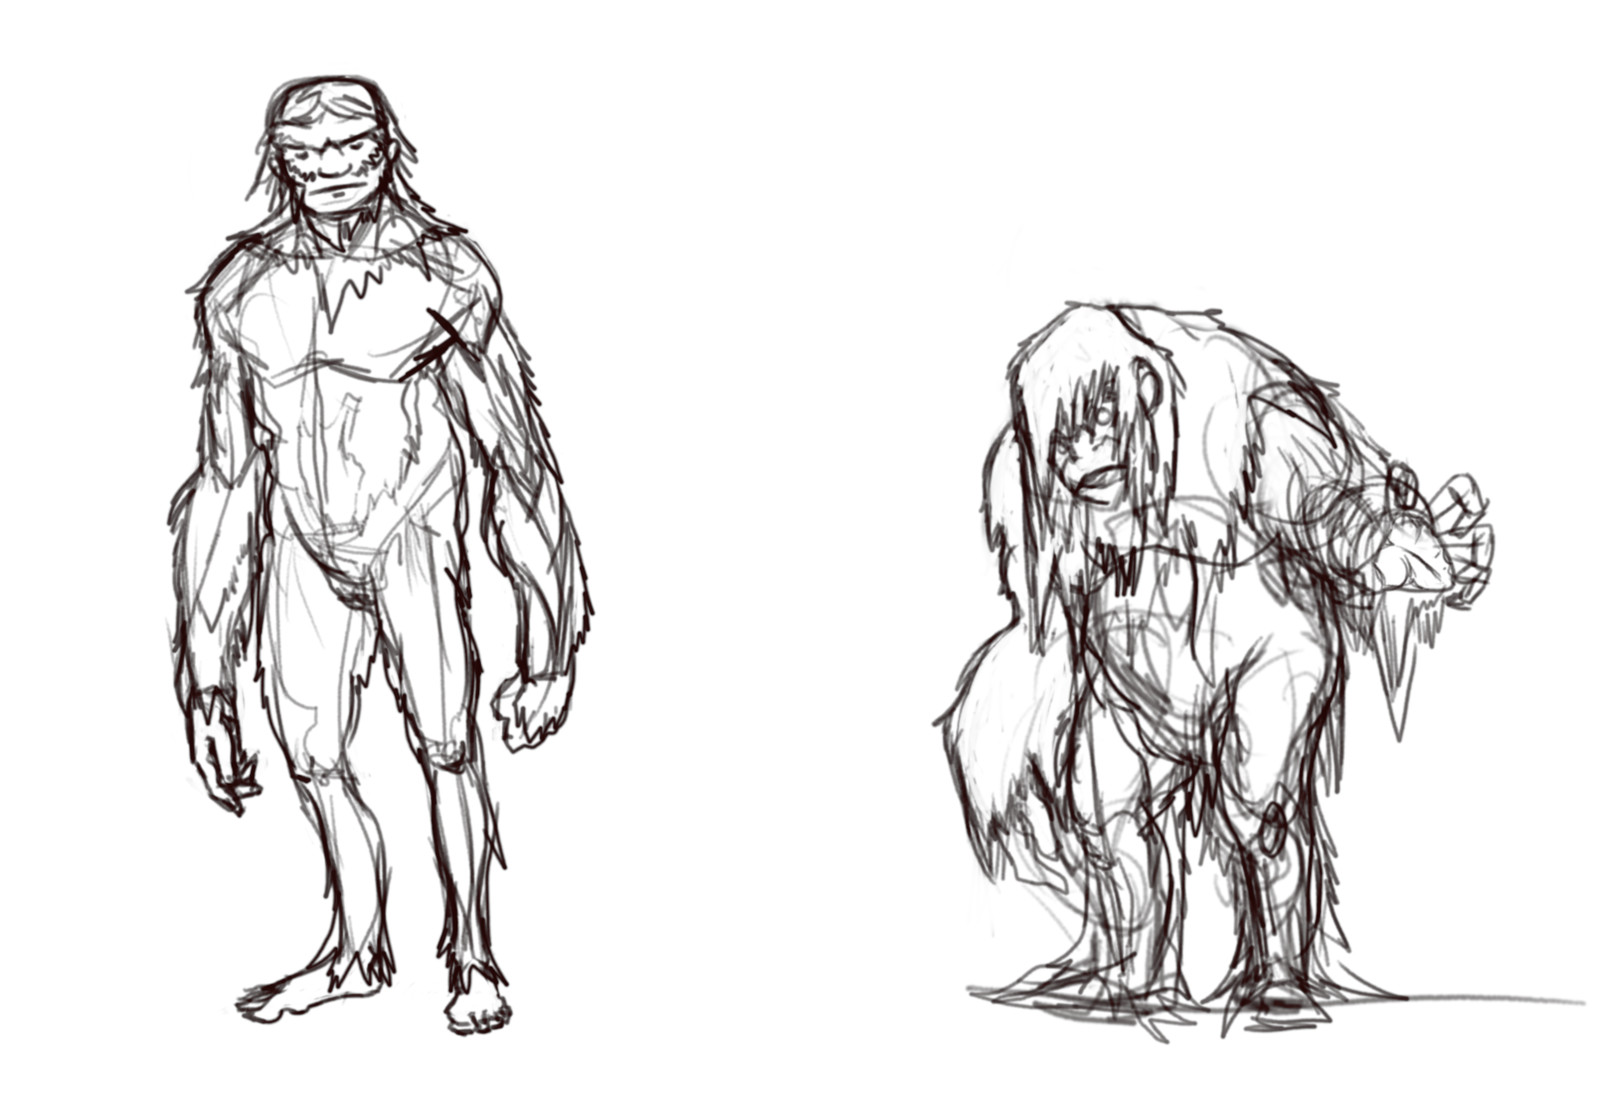 The first sketches for the Sasquatch and the Skunk Ape.